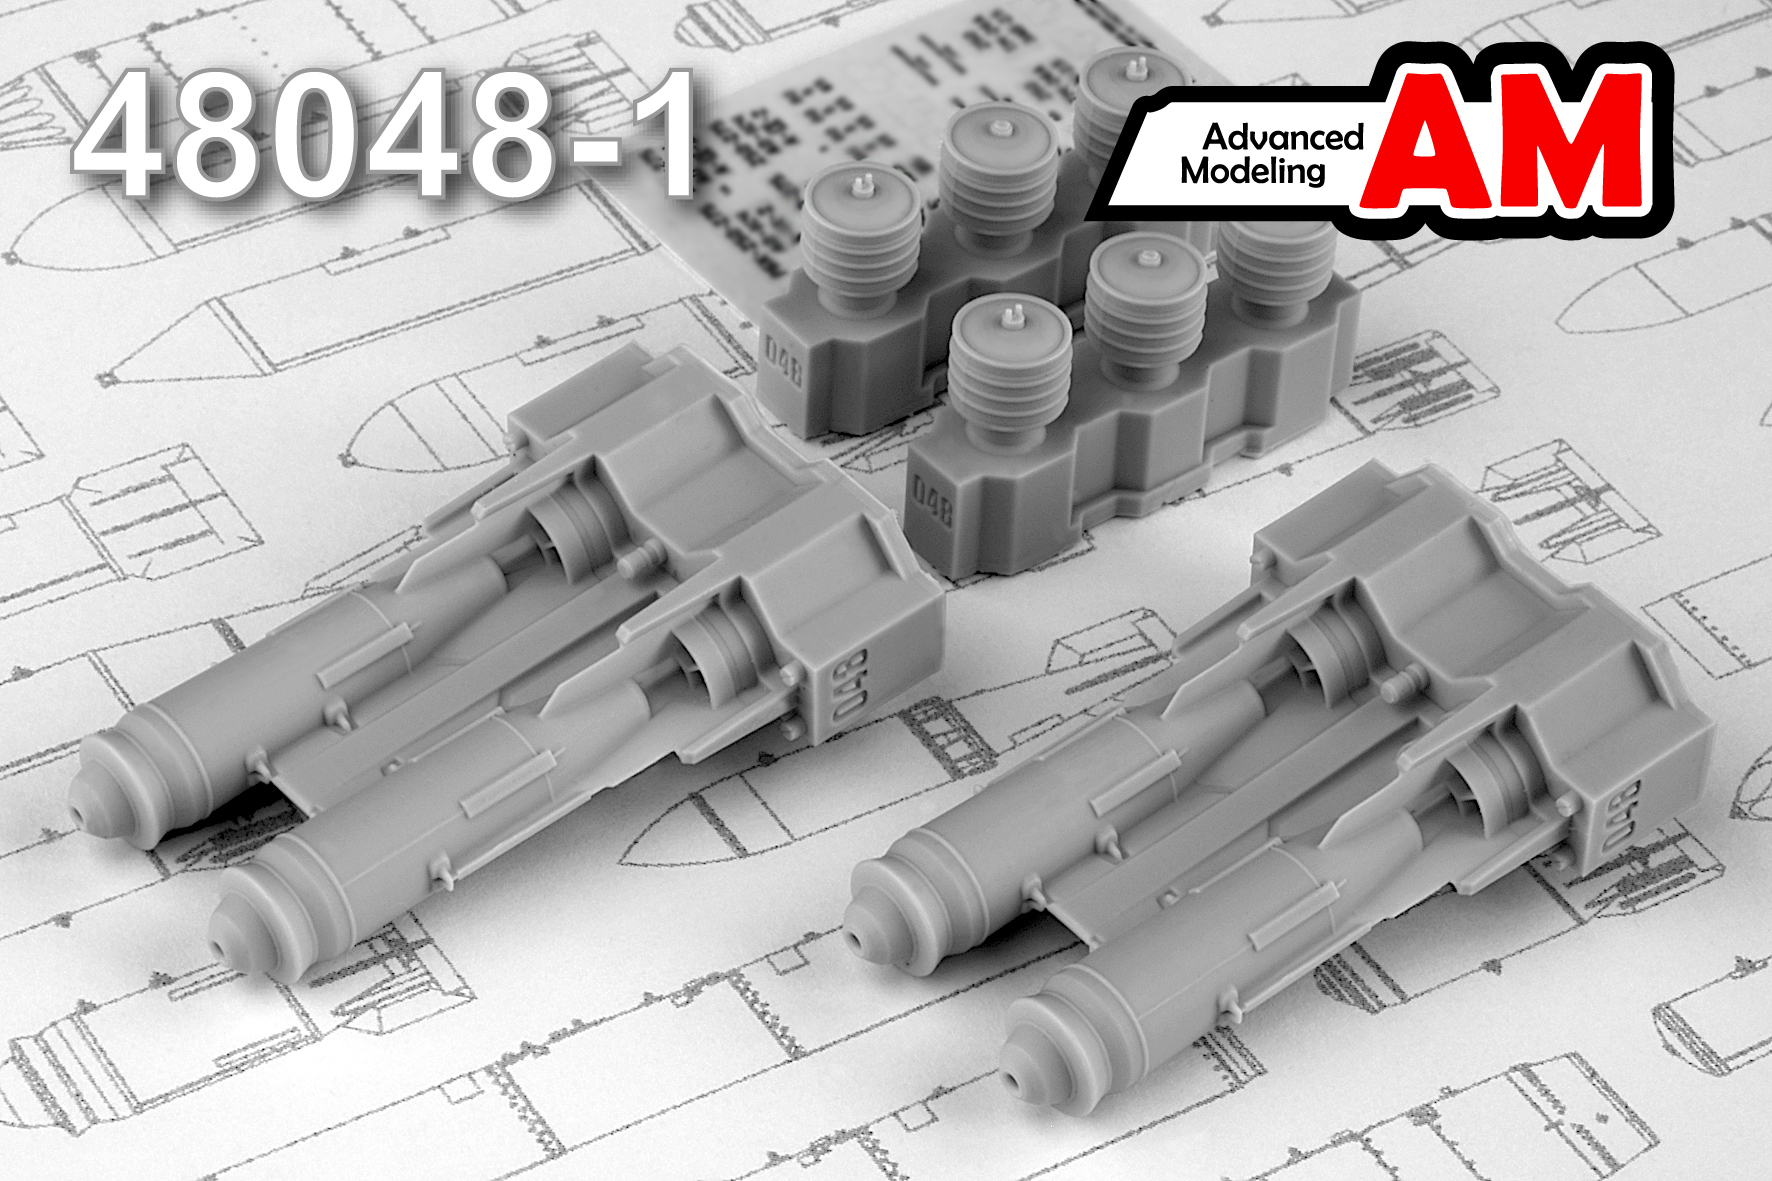 Additions (3D resin printing) 1/48 FAB-250 M-54 with TU-250 High-Explosive 250 kg bomb with parachute brake system (Advanced Modeling) 